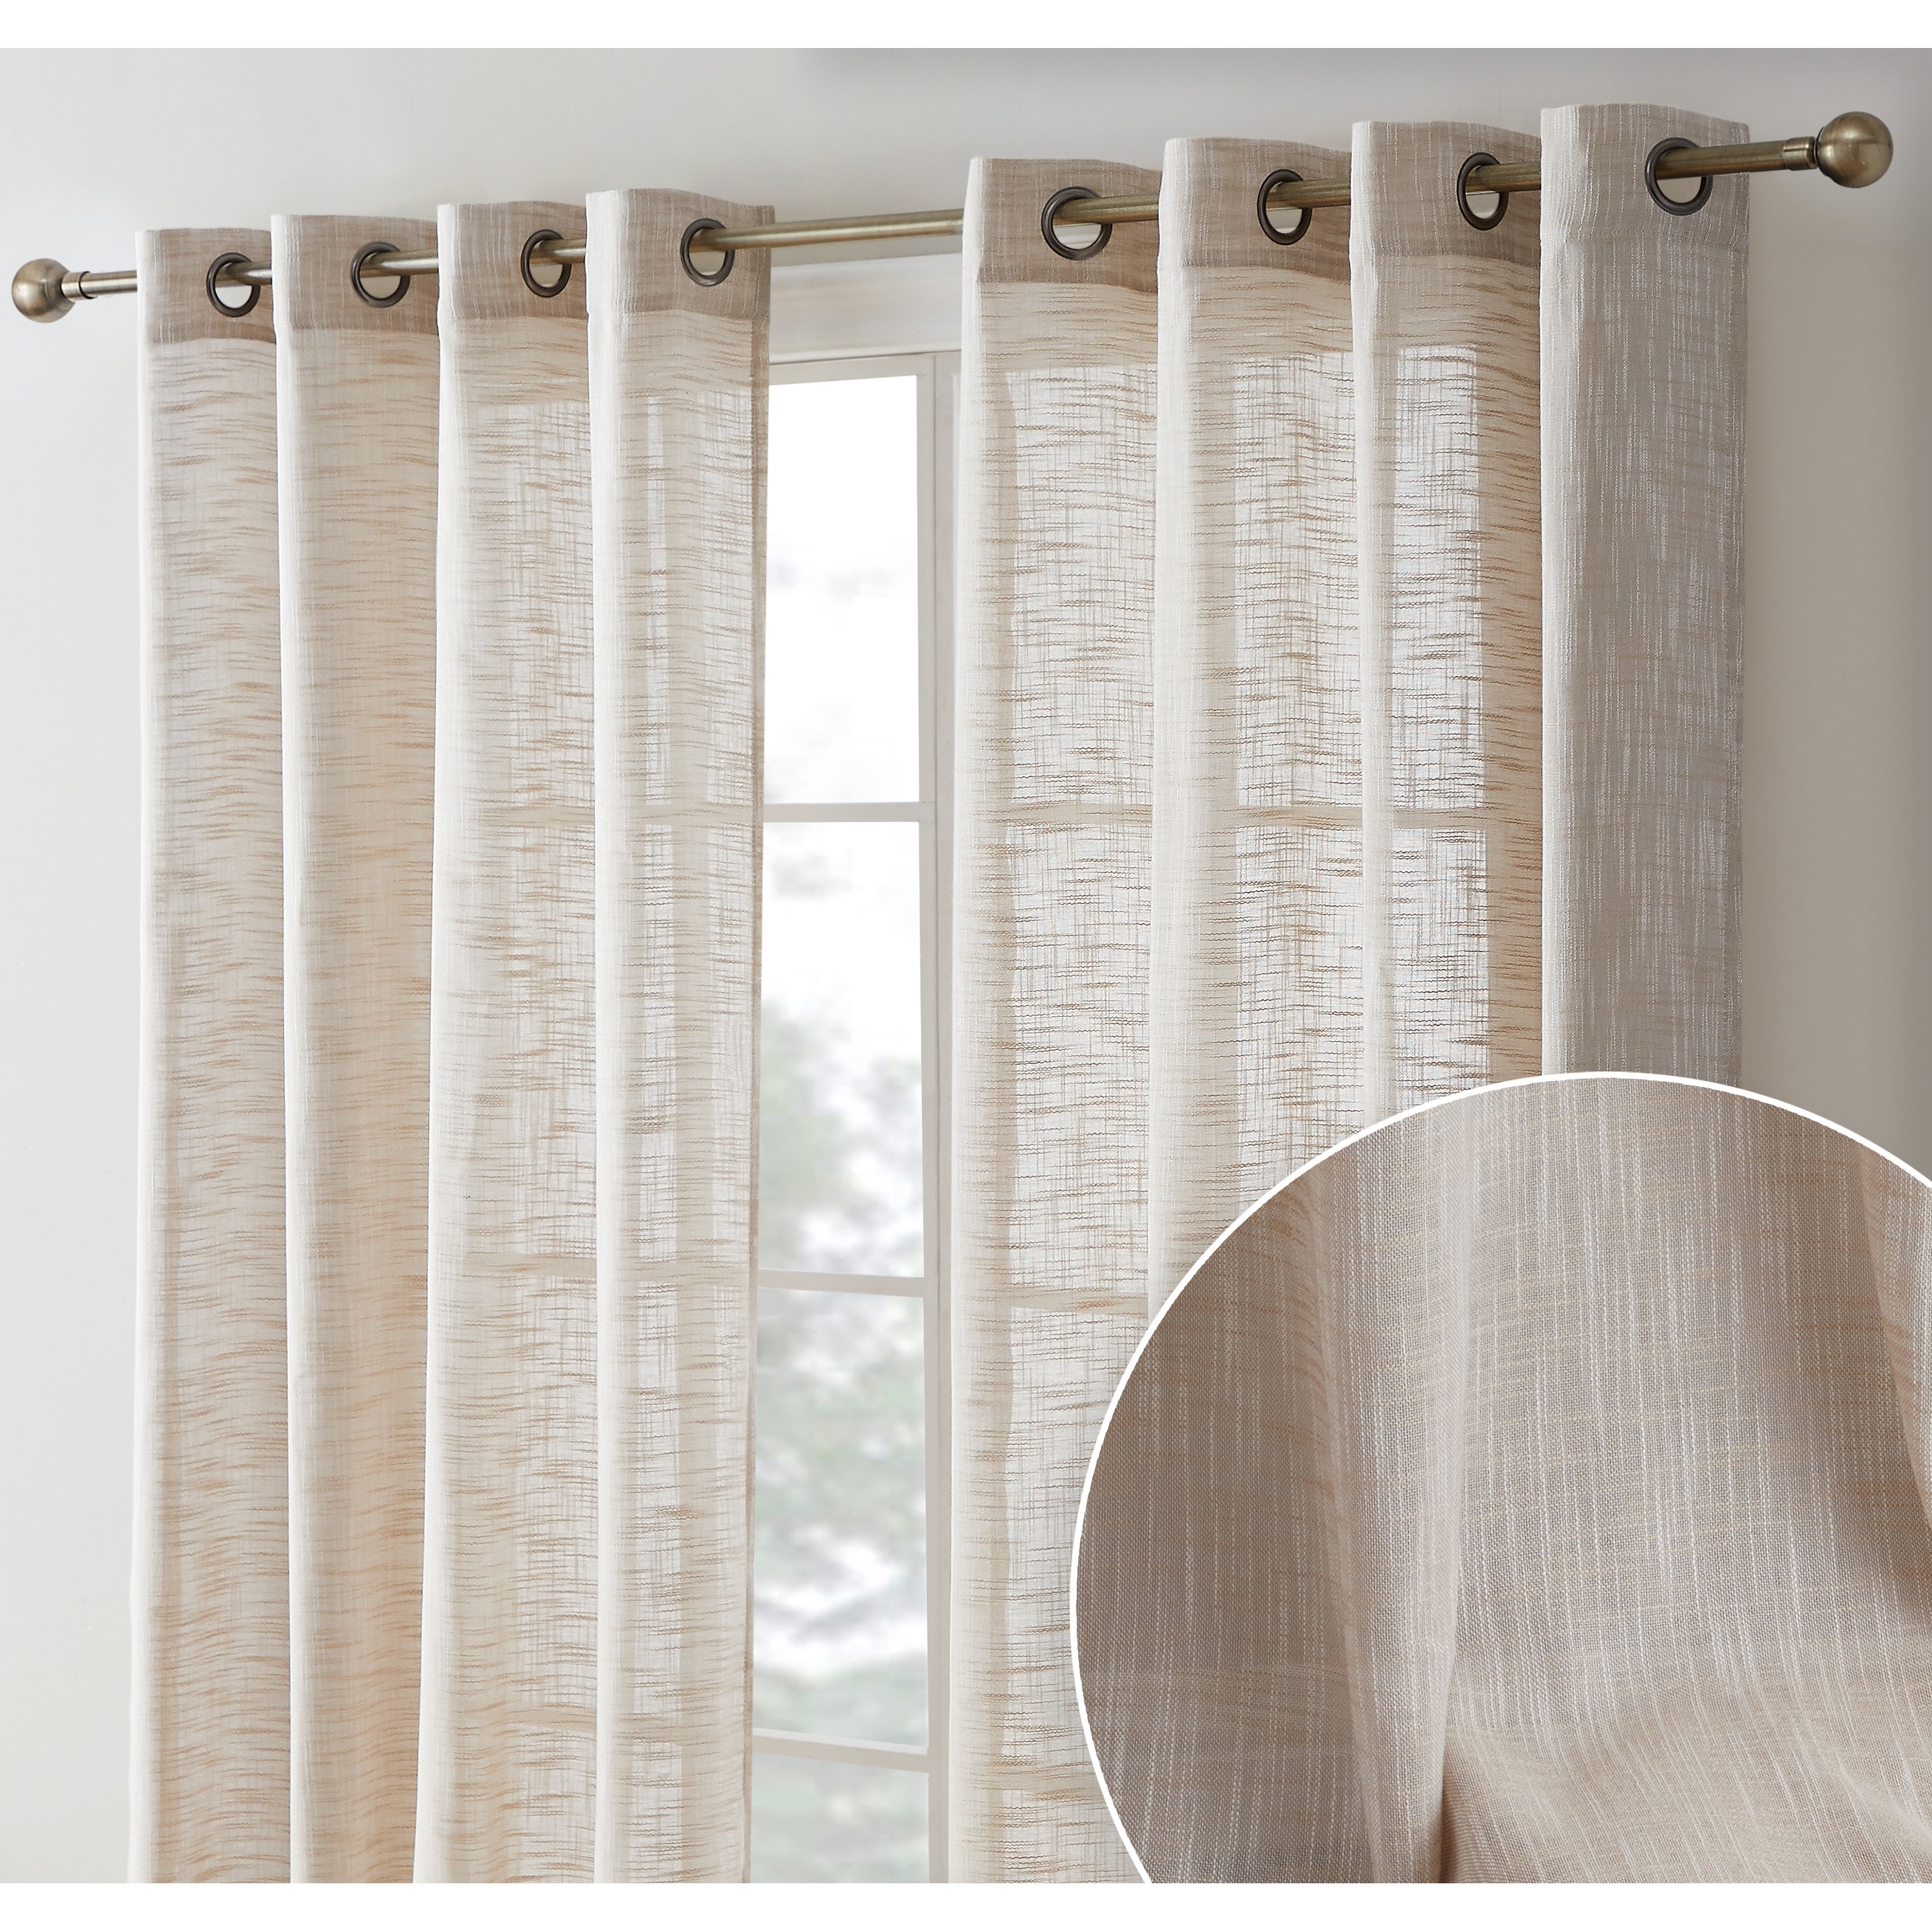 Home & Linens London Faux Linen Textured Sheer Privacy Sun Light Filtering Window Grommet Thick Curtains Panels, Set of 2